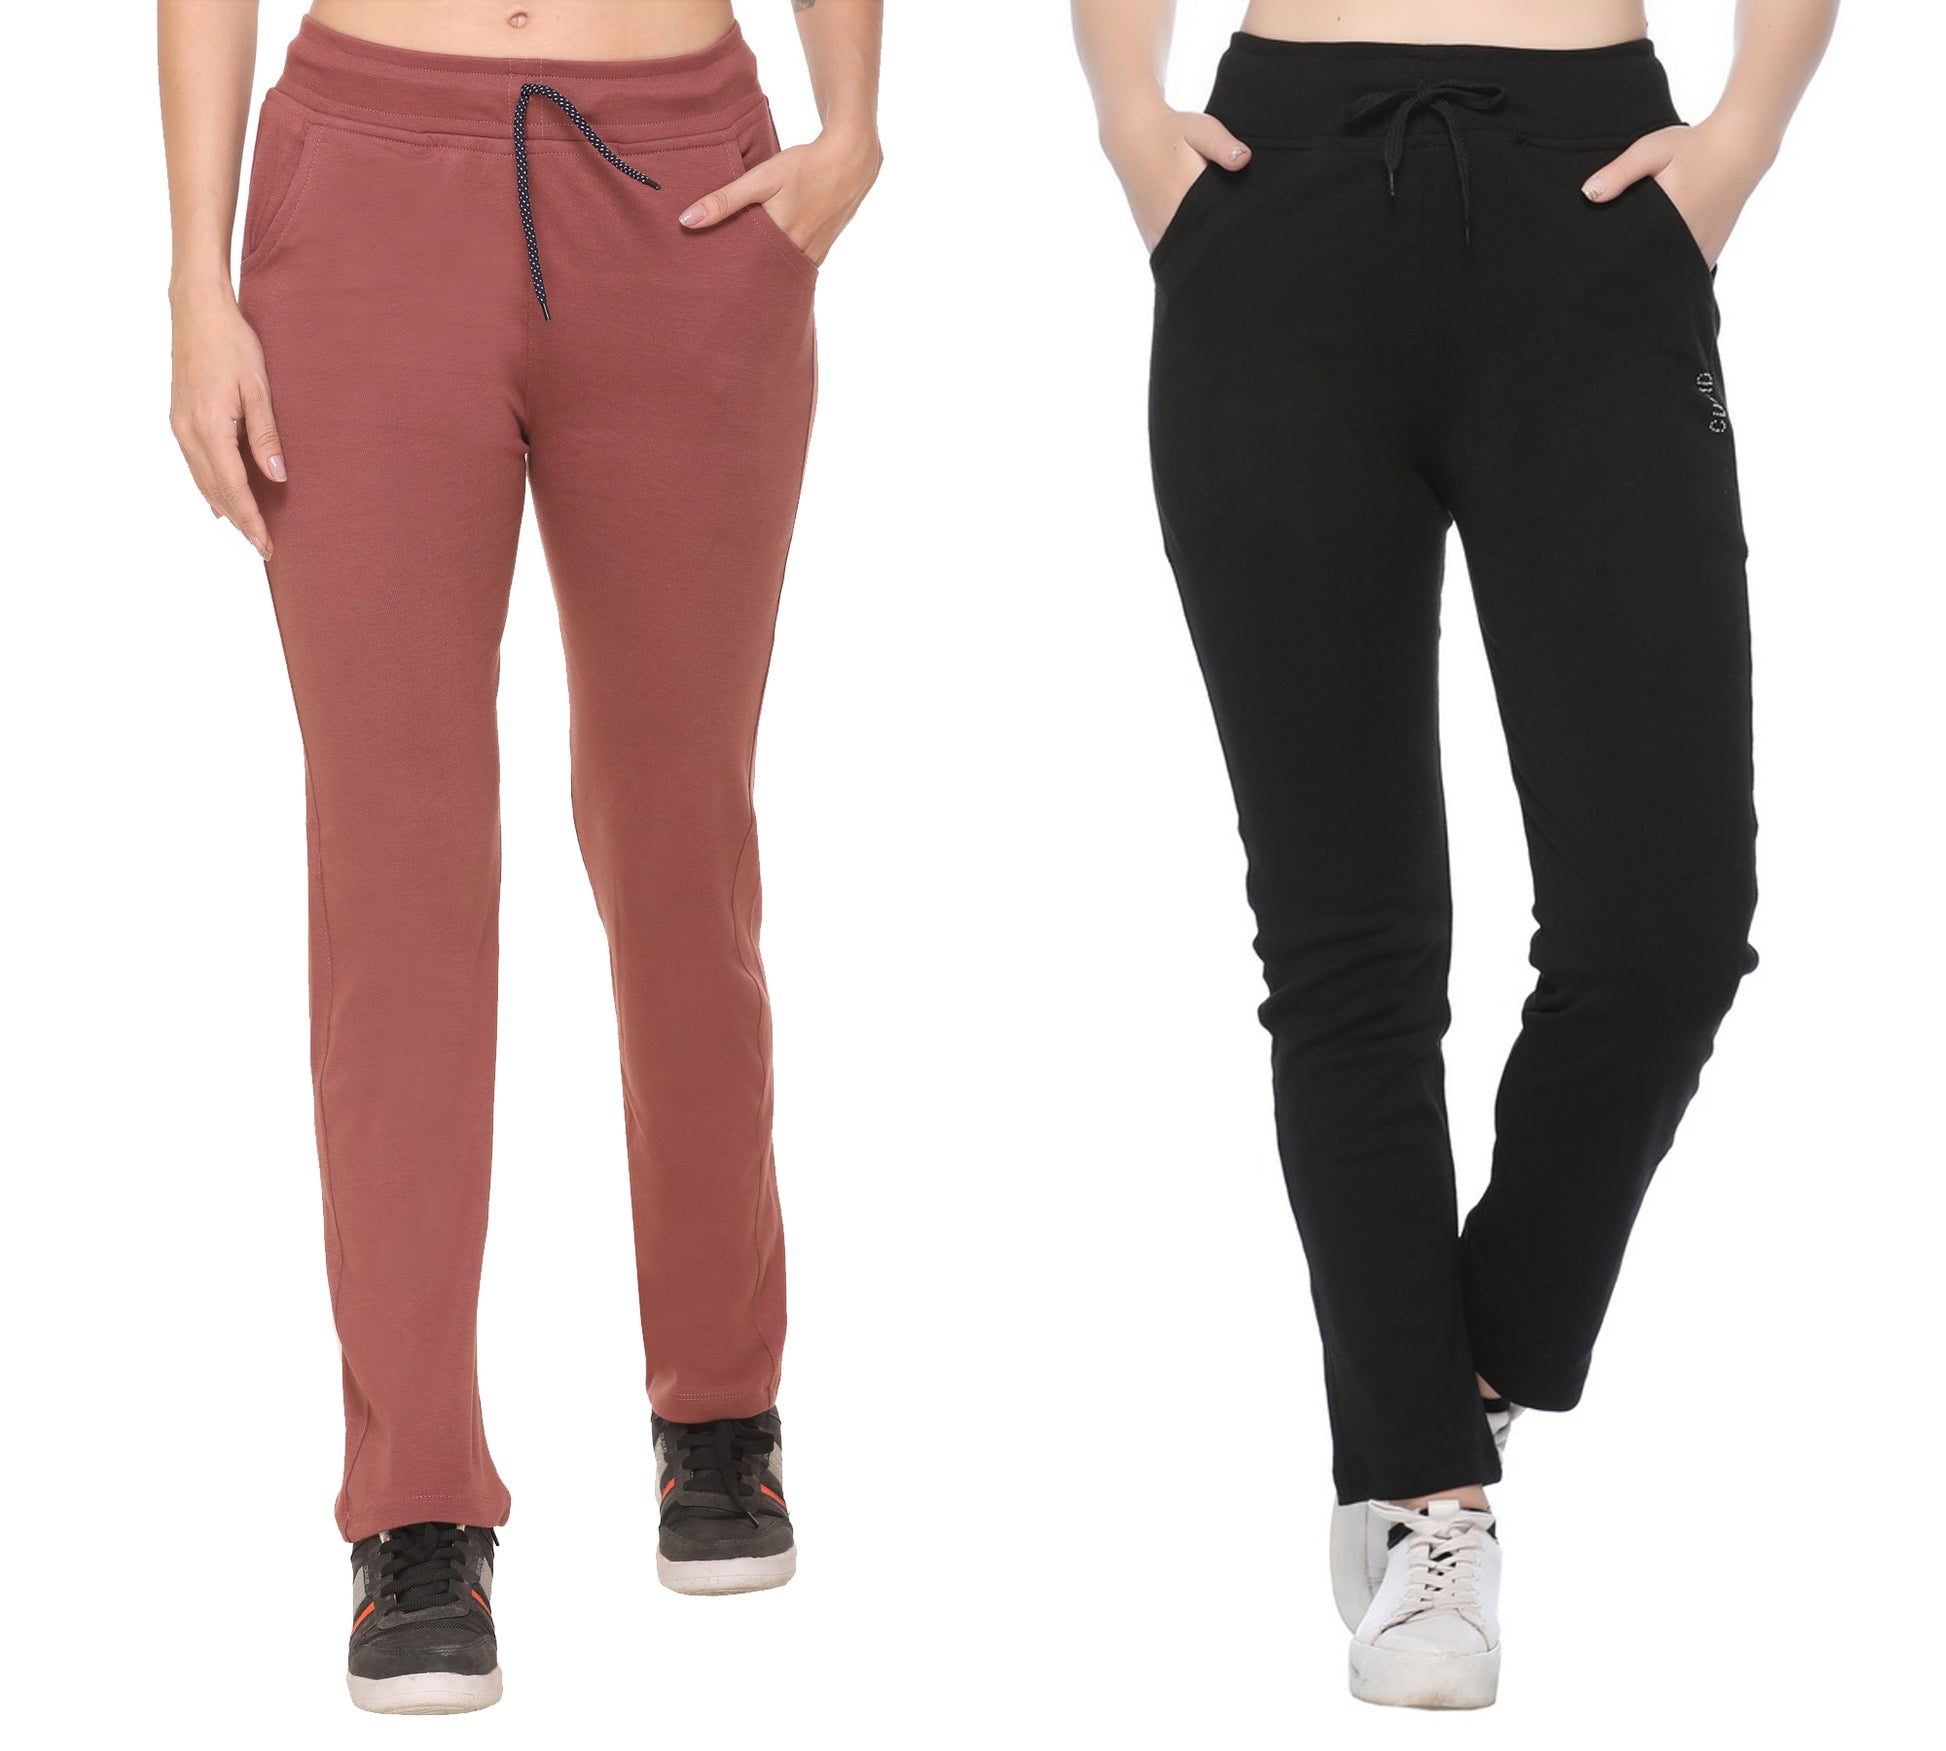 Stretchable Track Pants For Women - Cotton Lycra Activewear - Pack of 2 (Black & Copper Rust)